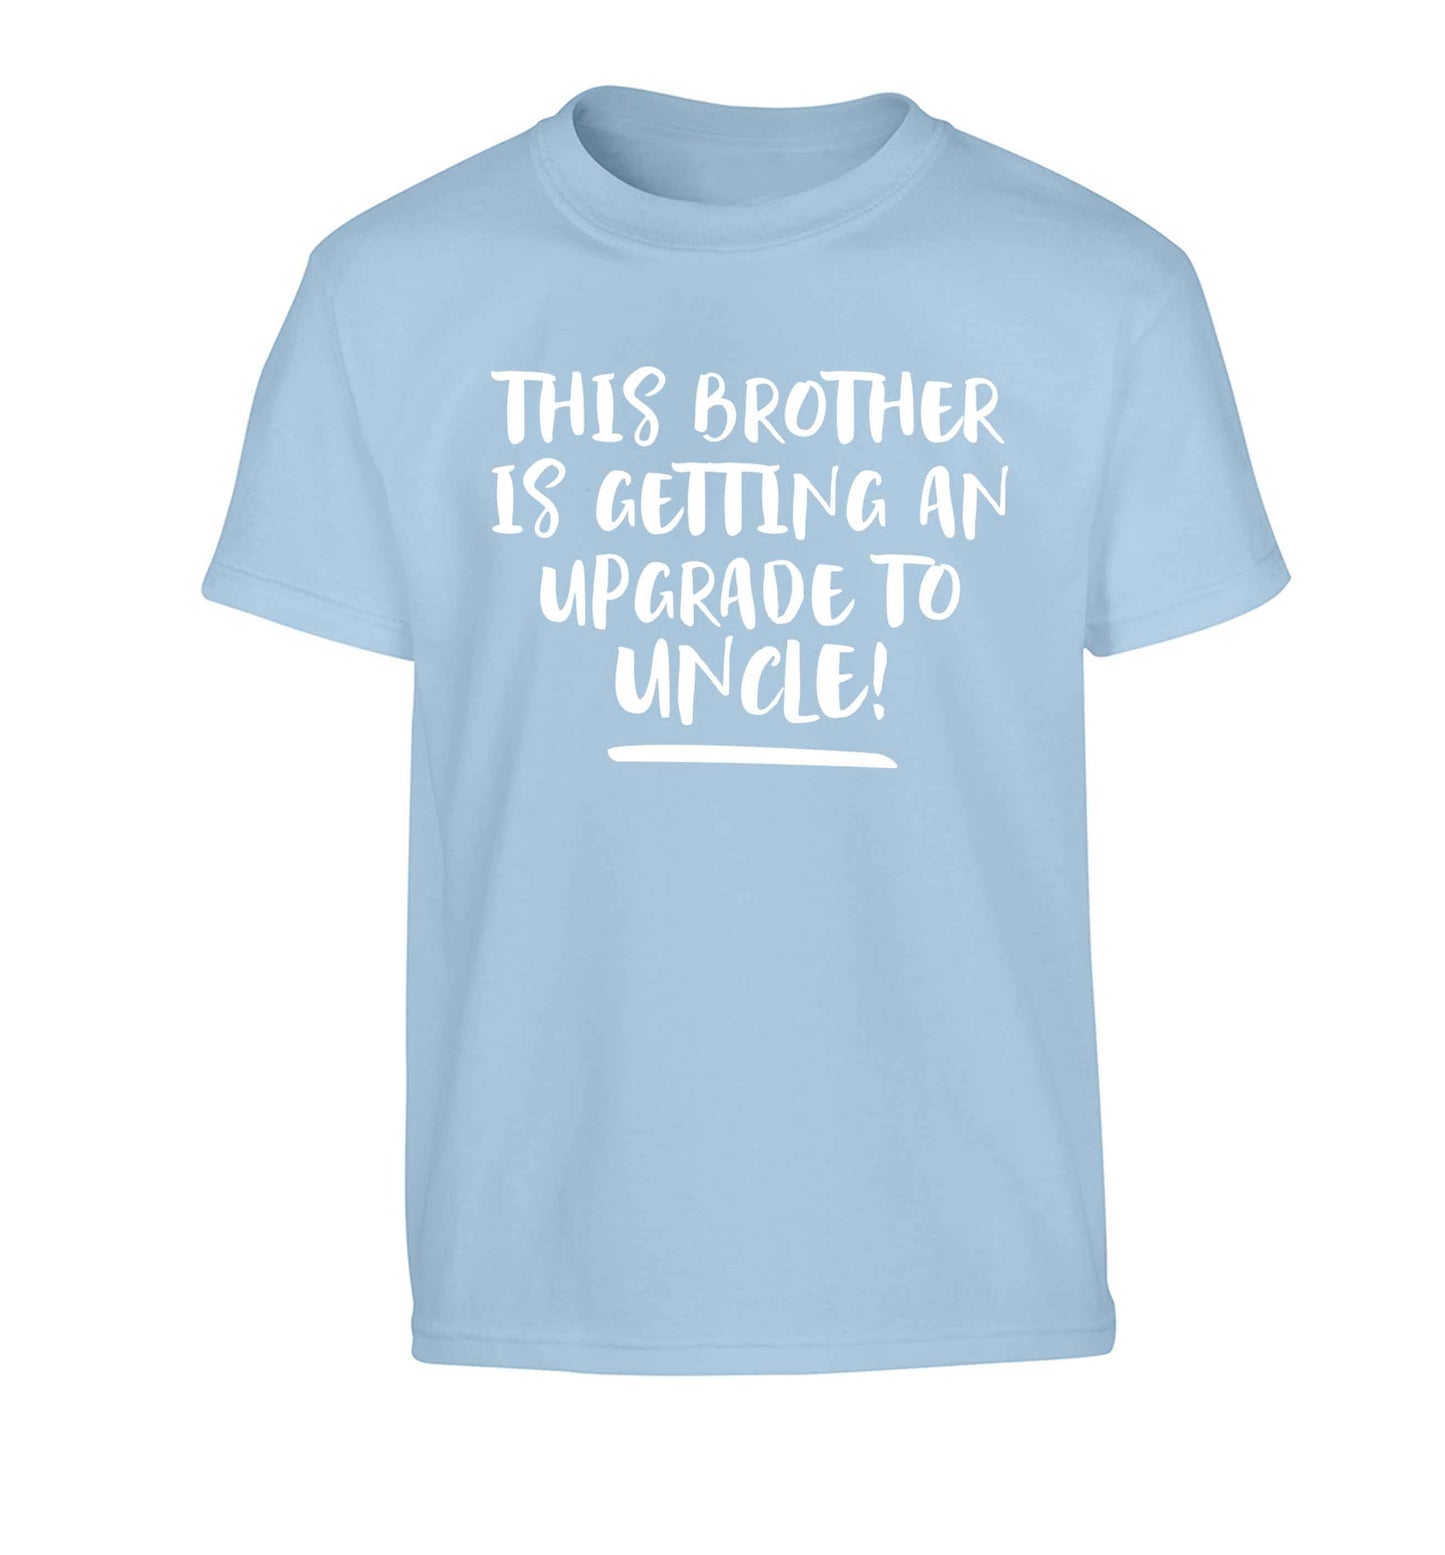 This brother is getting an upgrade to uncle! Children's light blue Tshirt 12-13 Years